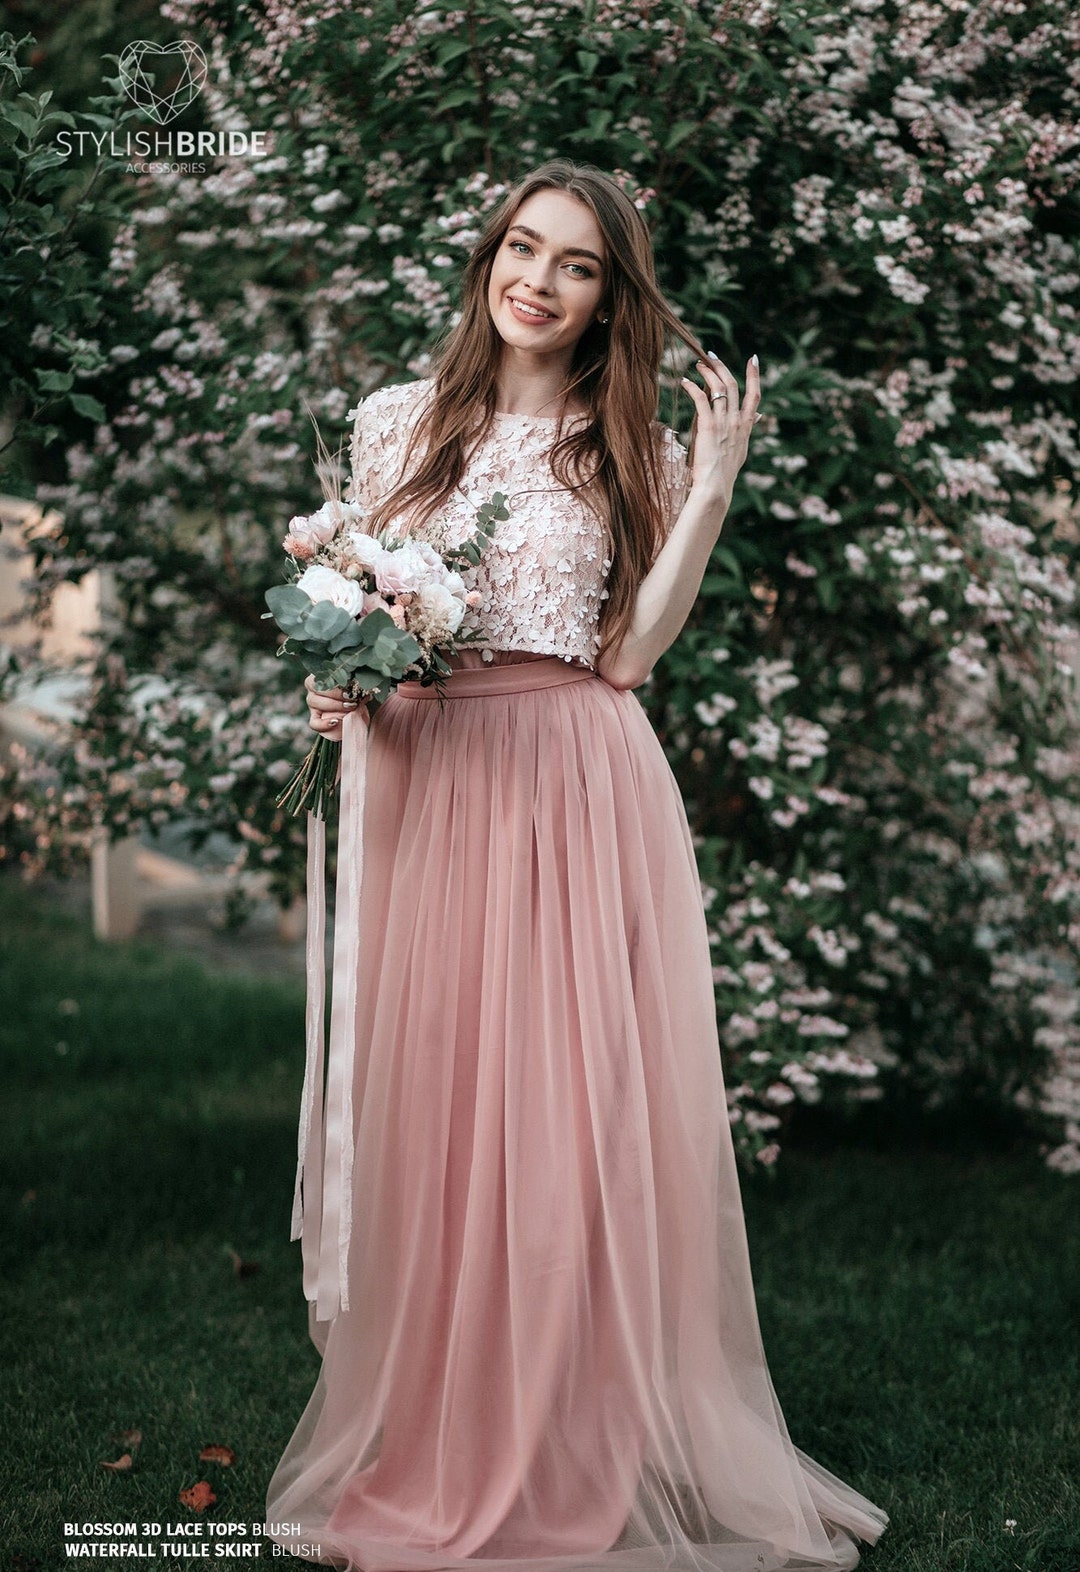 Blossom Dress, Blush Lace Dress 3 Pieces Set : Waterfall Tulle Skirt ...